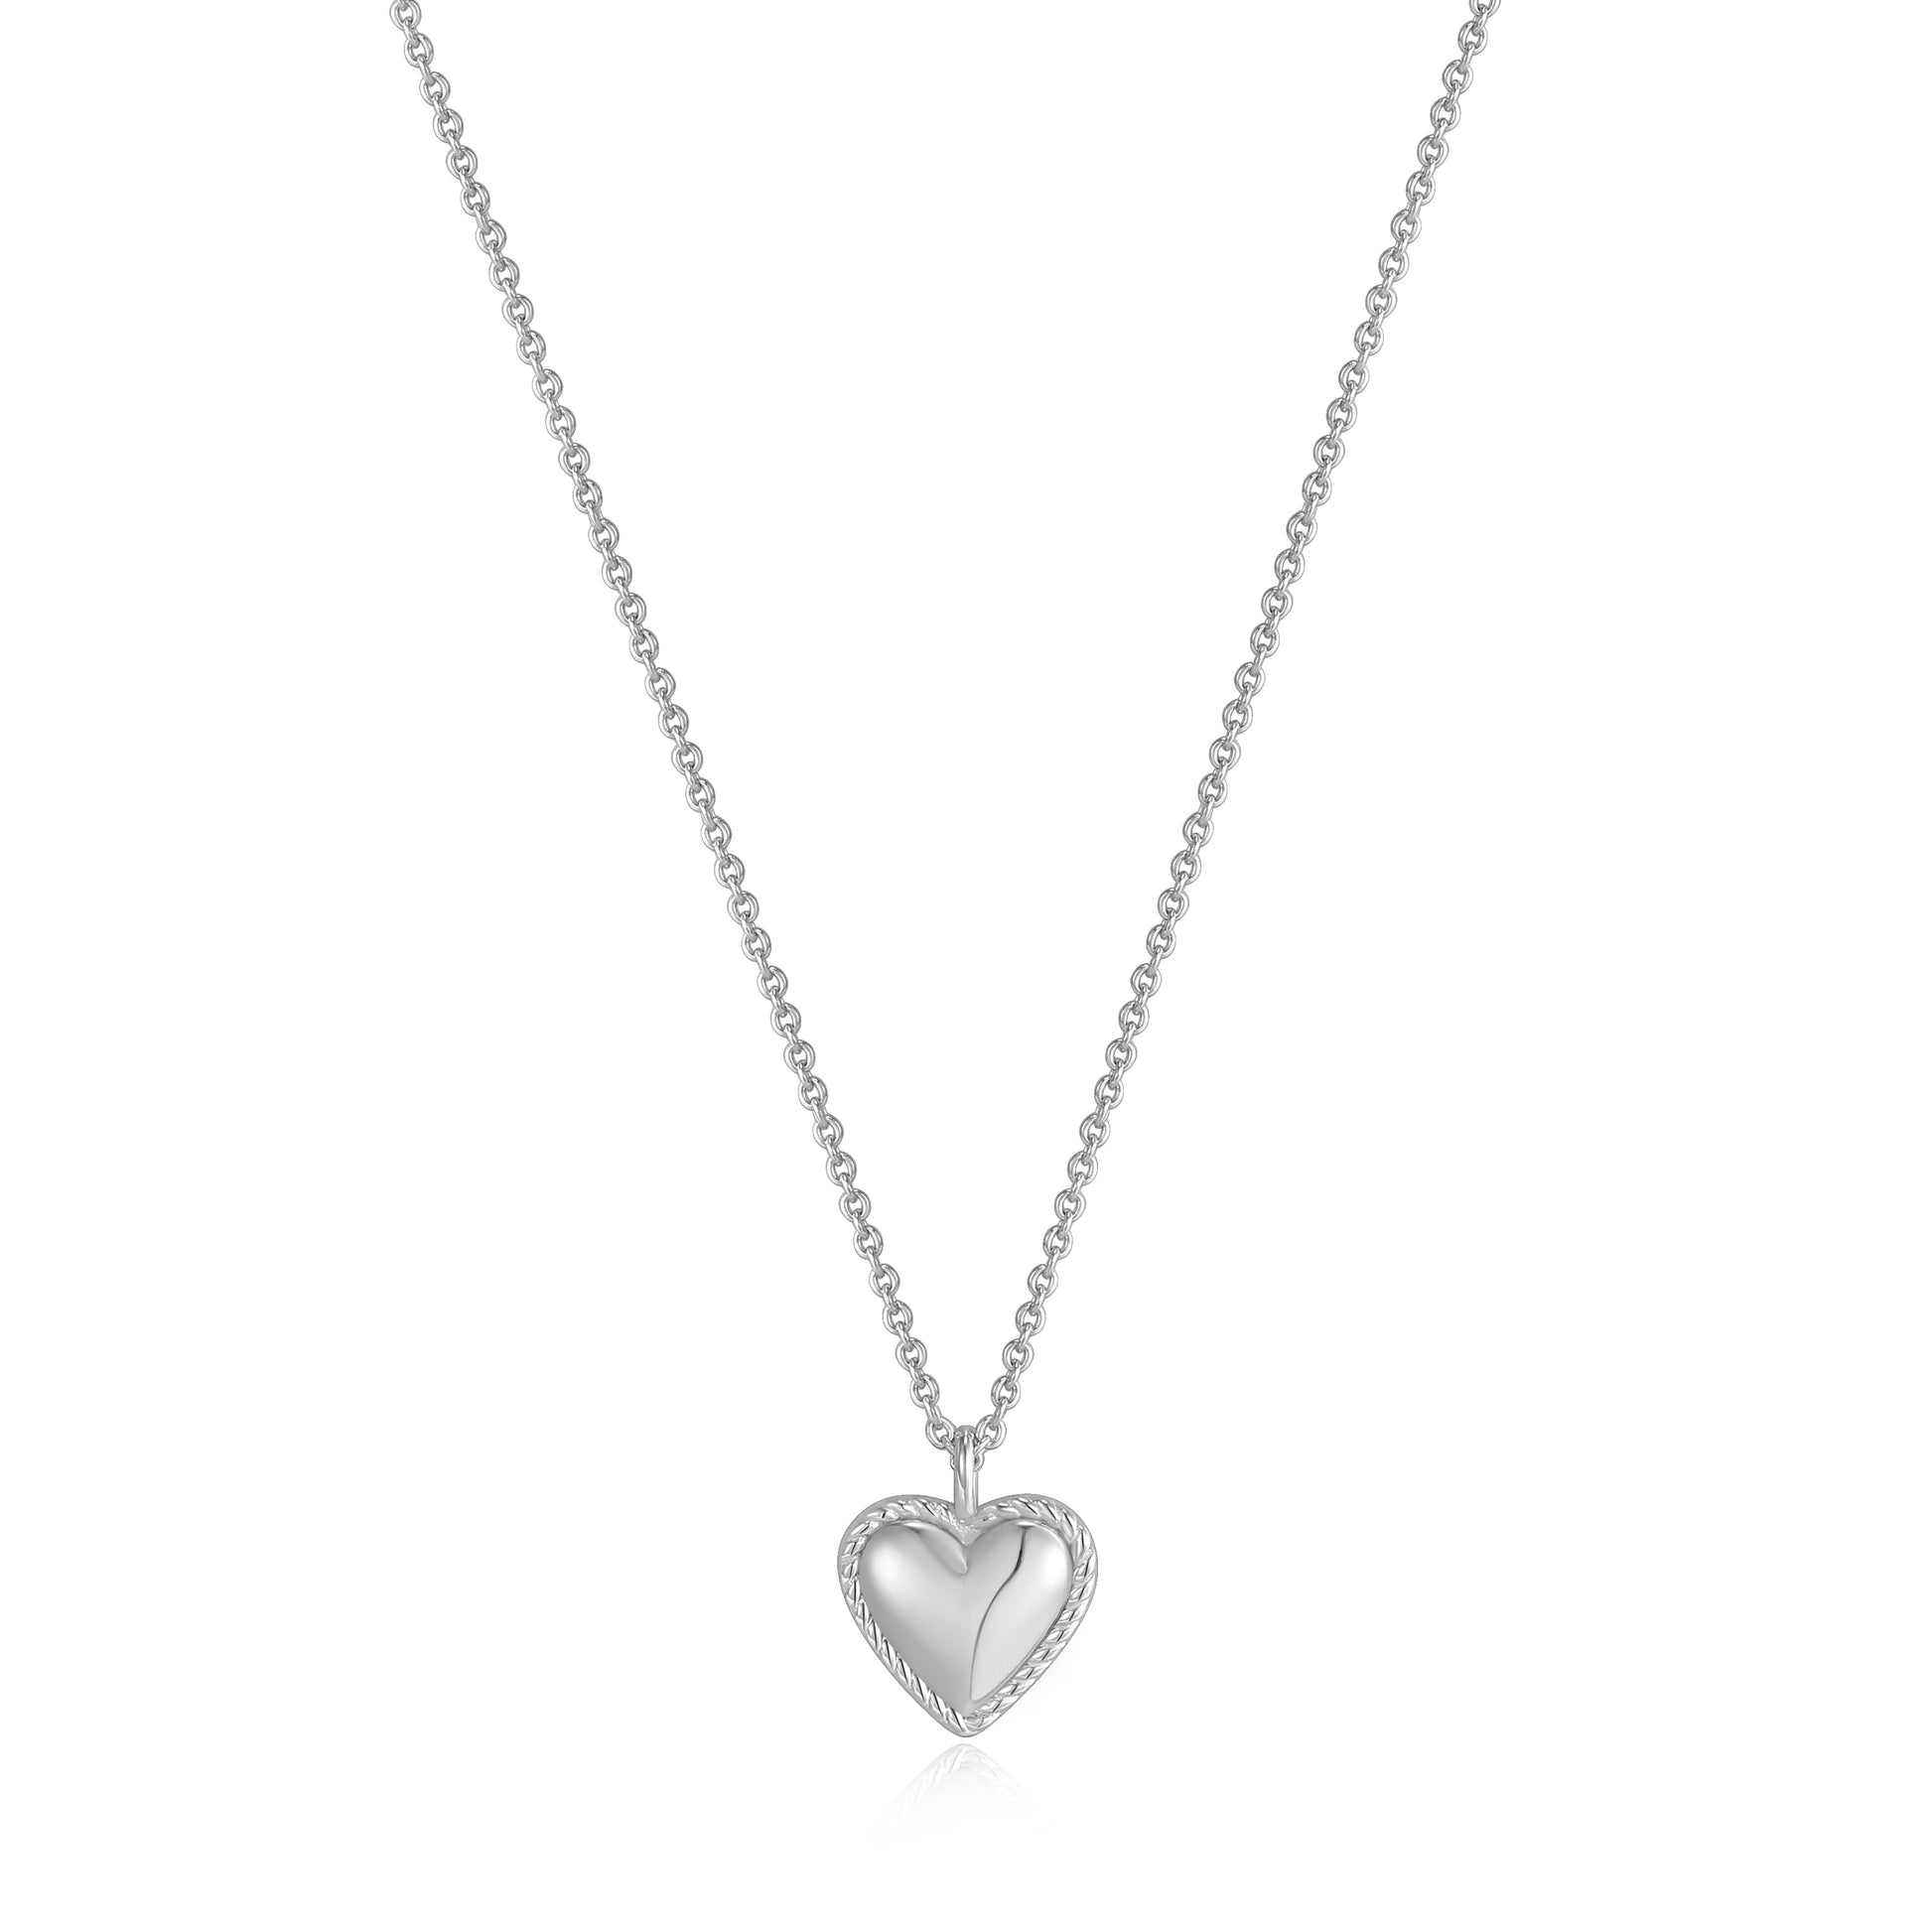 Ania Haie Rope Heart Pendant Necklace - Silver Necklace